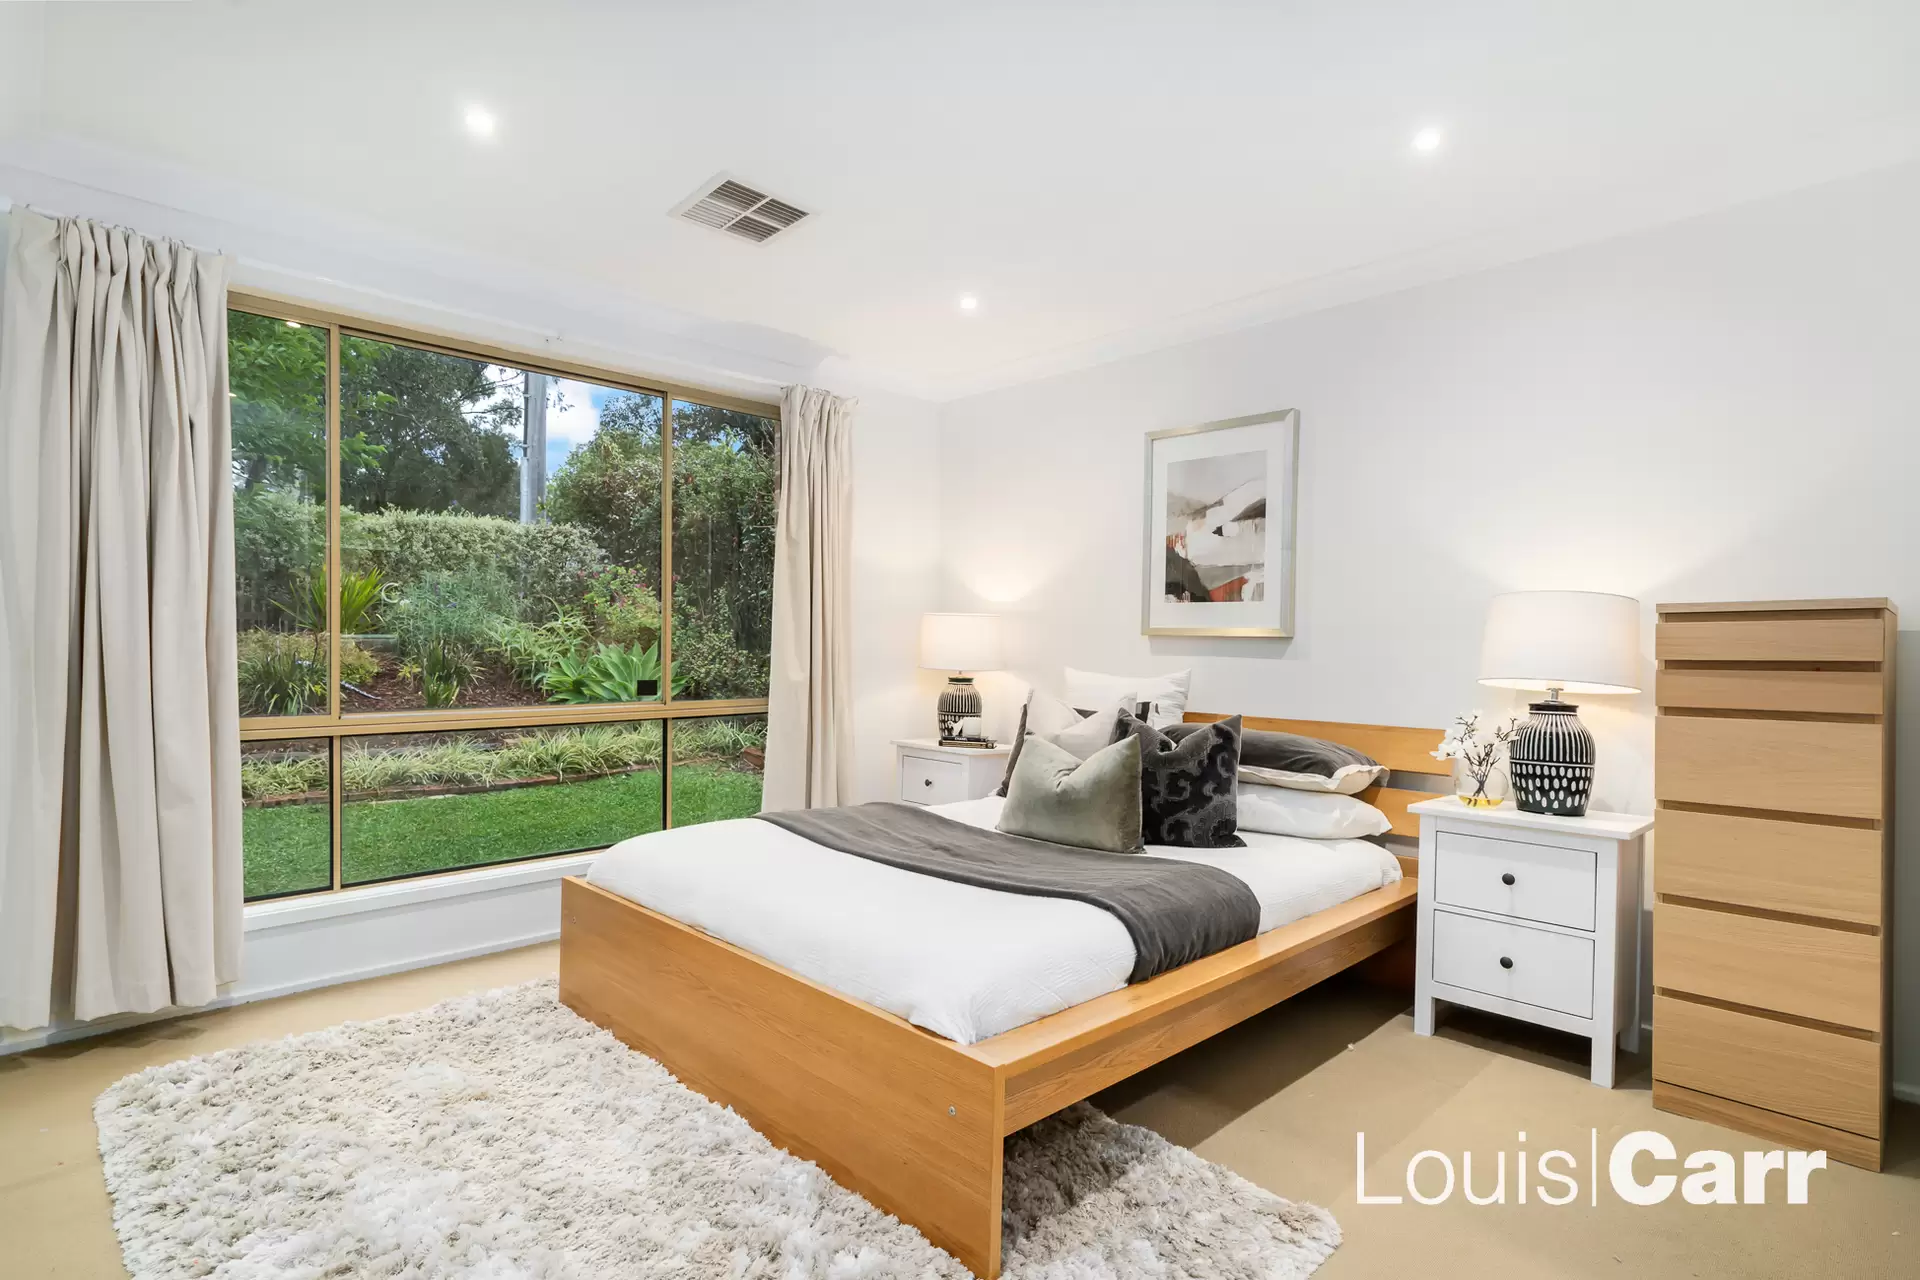 Photo #8: 57 Purchase Road, Cherrybrook - Sold by Louis Carr Real Estate